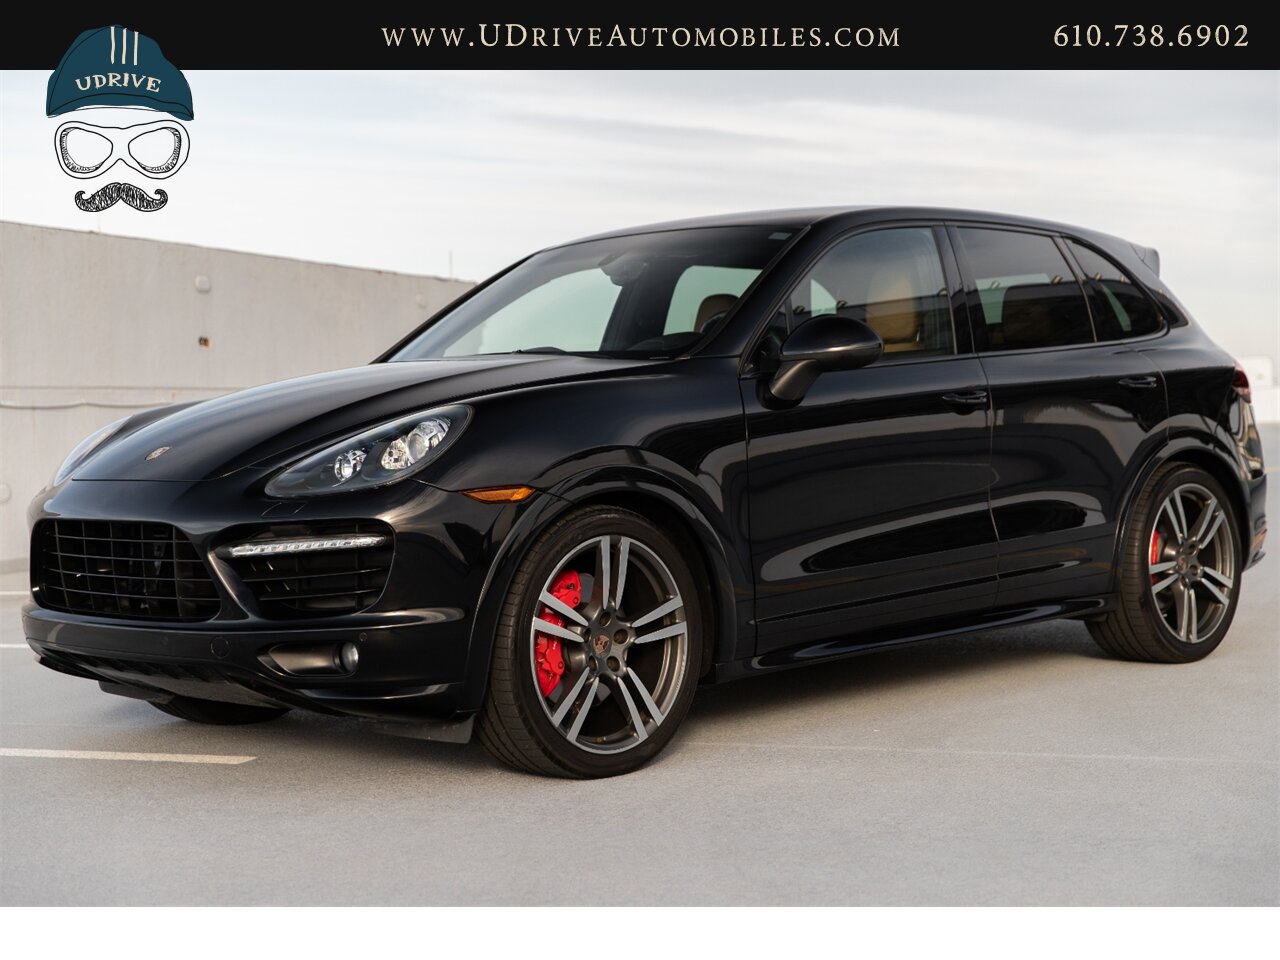 2013 Porsche Cayenne GTS Service History 1 Owner 21in Wheels  Espresso / Cognac Two Tone Leather - Photo 11 - West Chester, PA 19382